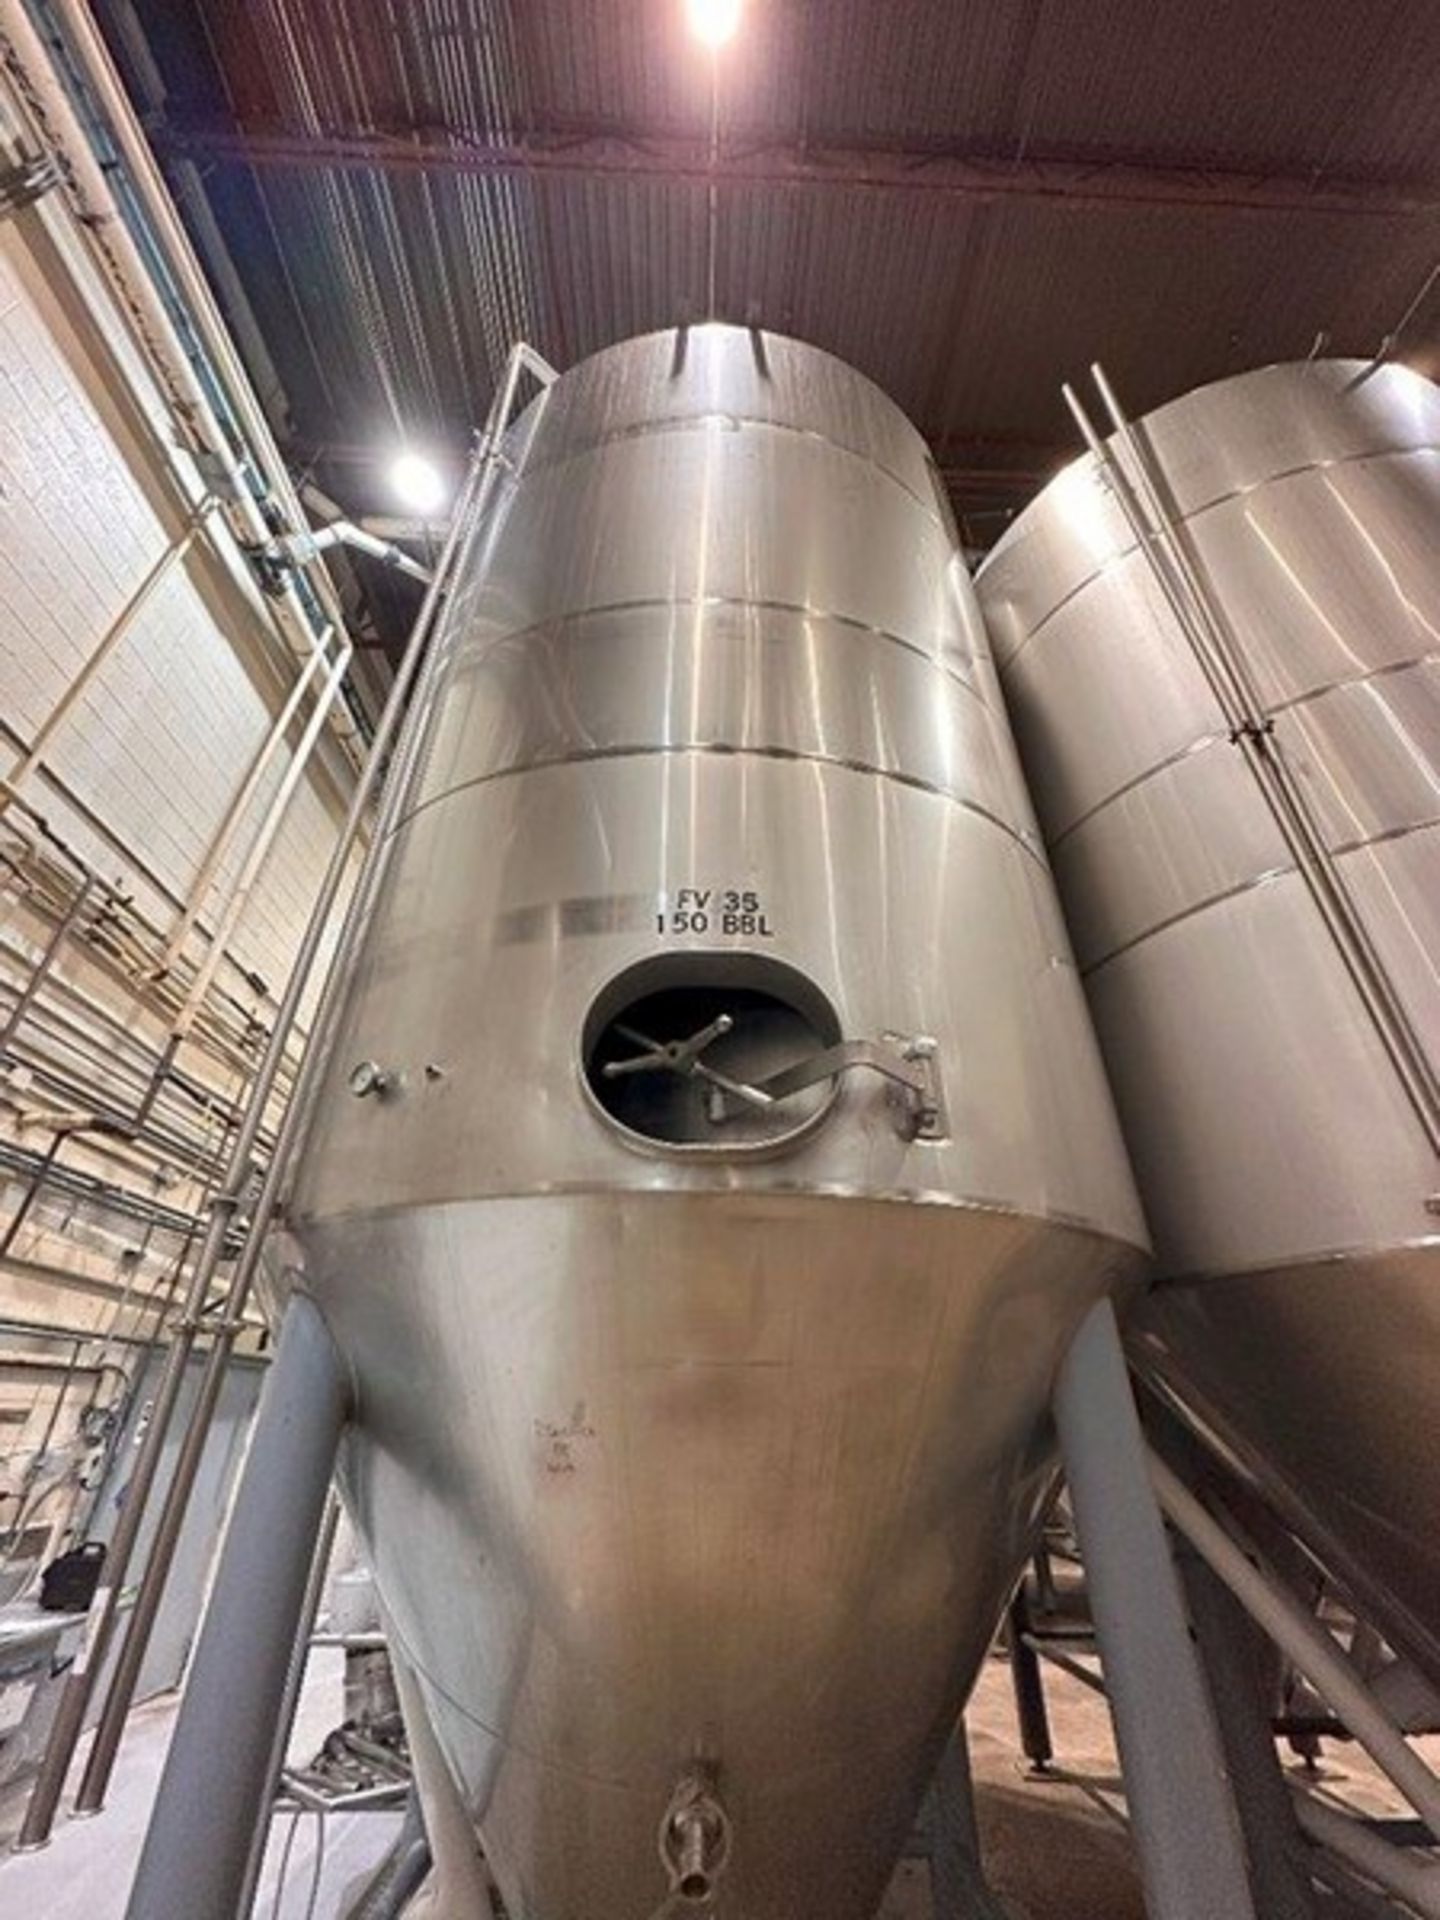 150 BBL (4650 Gallon) Vertical Cone Bottom 304 Stainless Steel Jacketed Vessel. Manufactured by Sant - Bild 2 aus 9